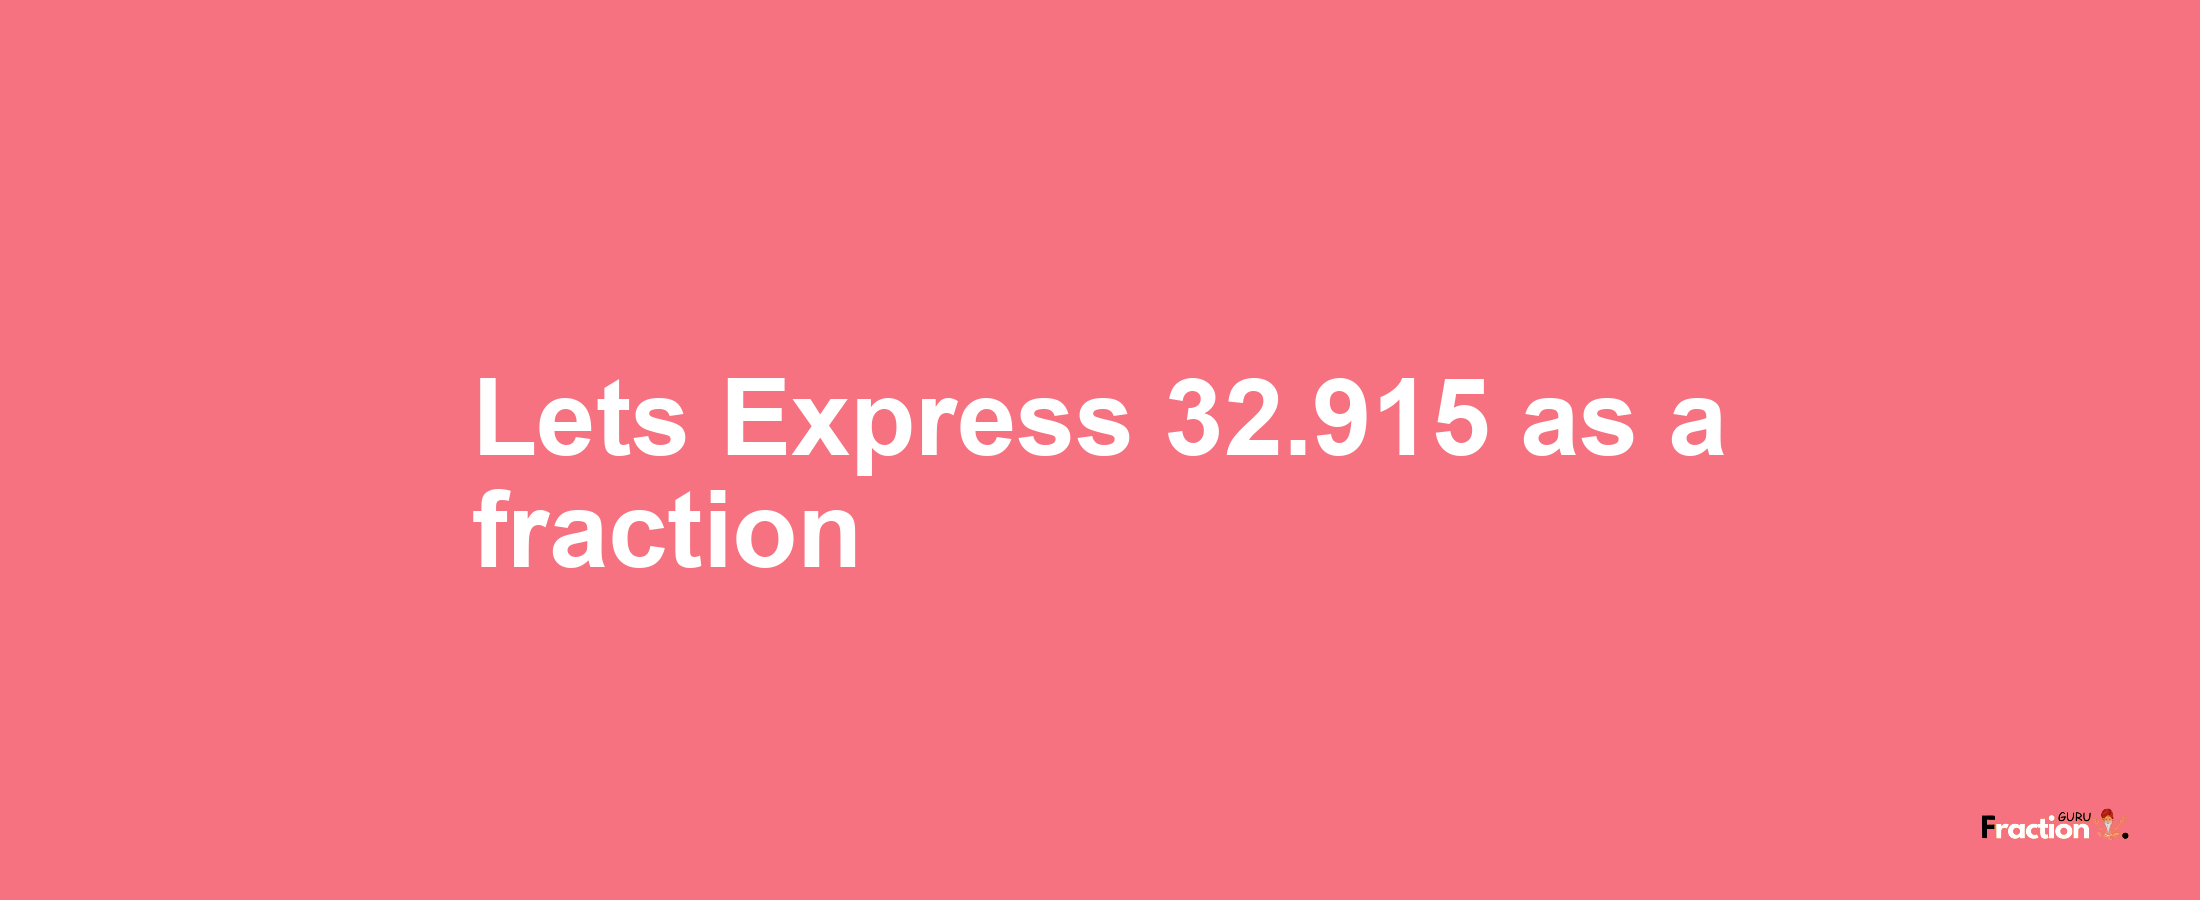 Lets Express 32.915 as afraction